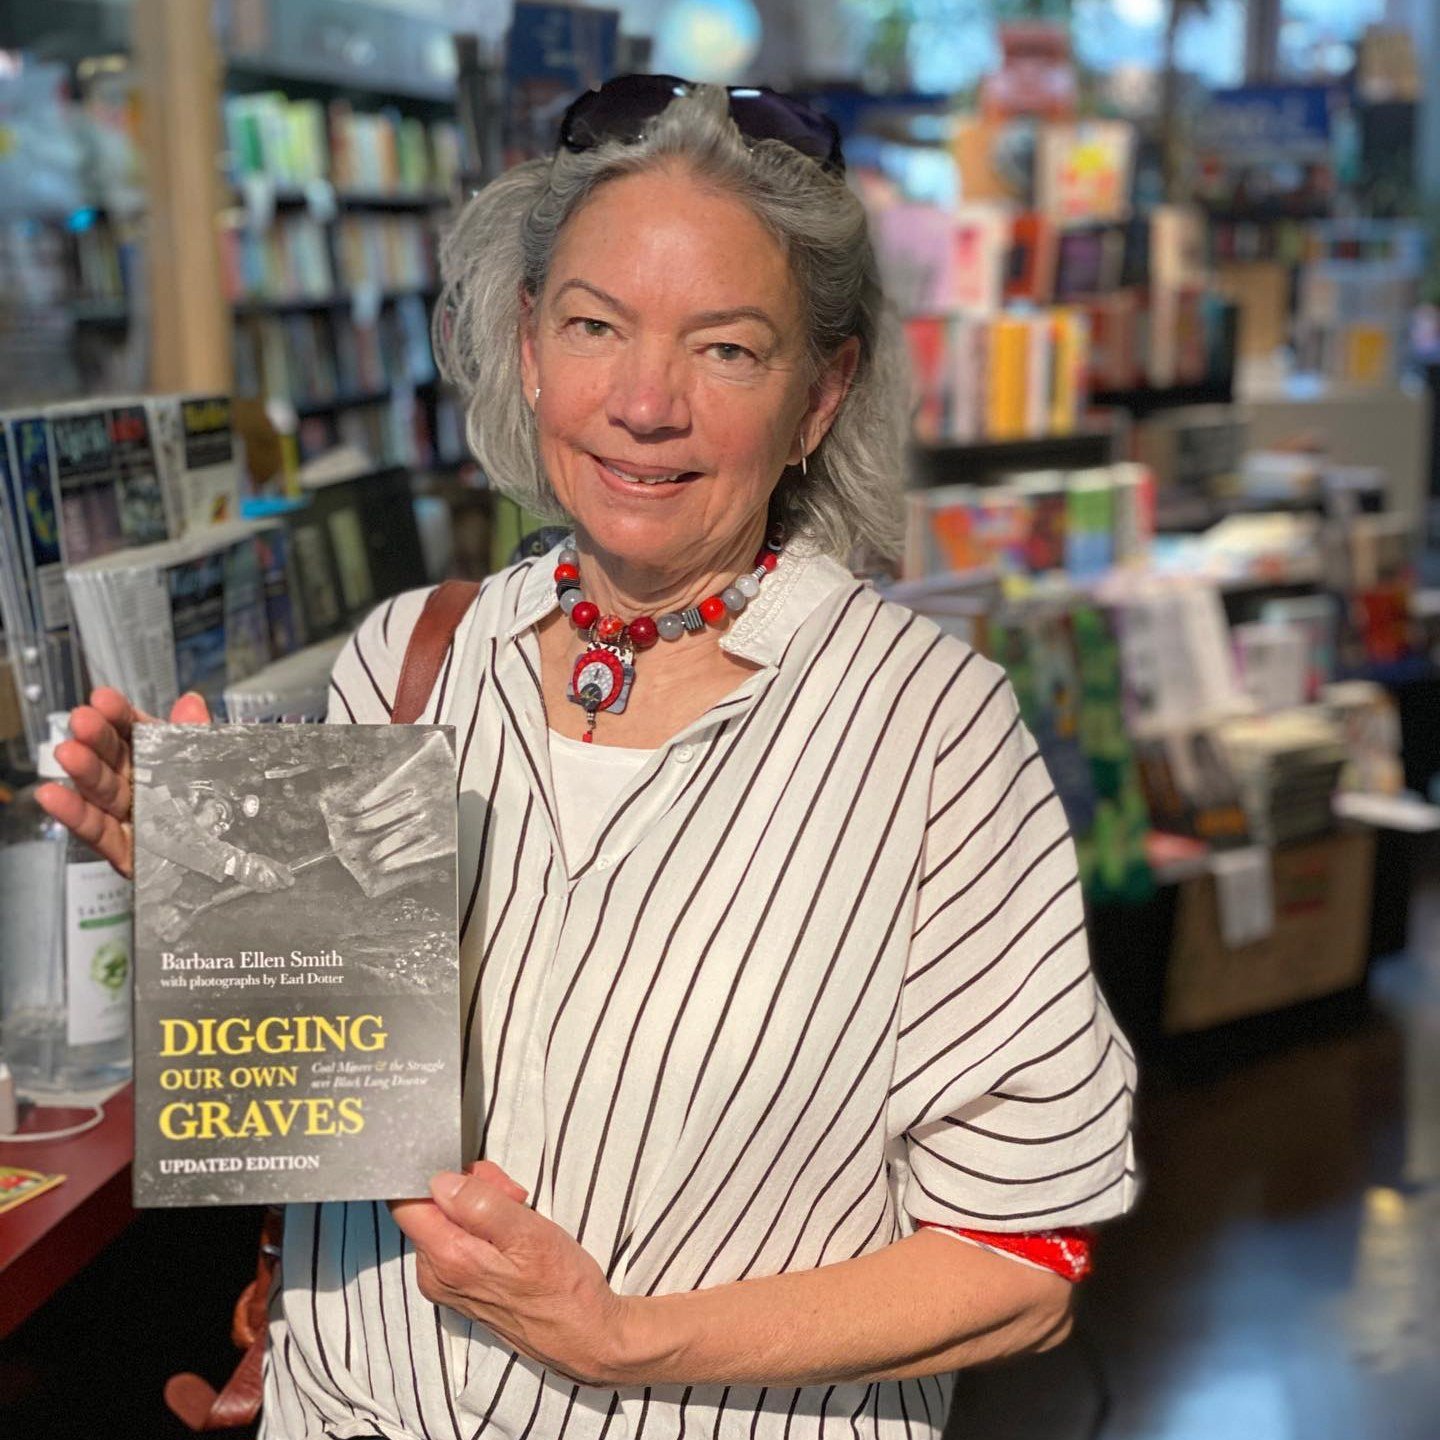 ‼️ 📚We've got a great book for to share with you today, written by none other than our current board president, Barbara Ellen Smith! 📖 ⛏️

Digging Our Own Graves 

Employment and production in the Appalachian coal industry have plummeted over recen